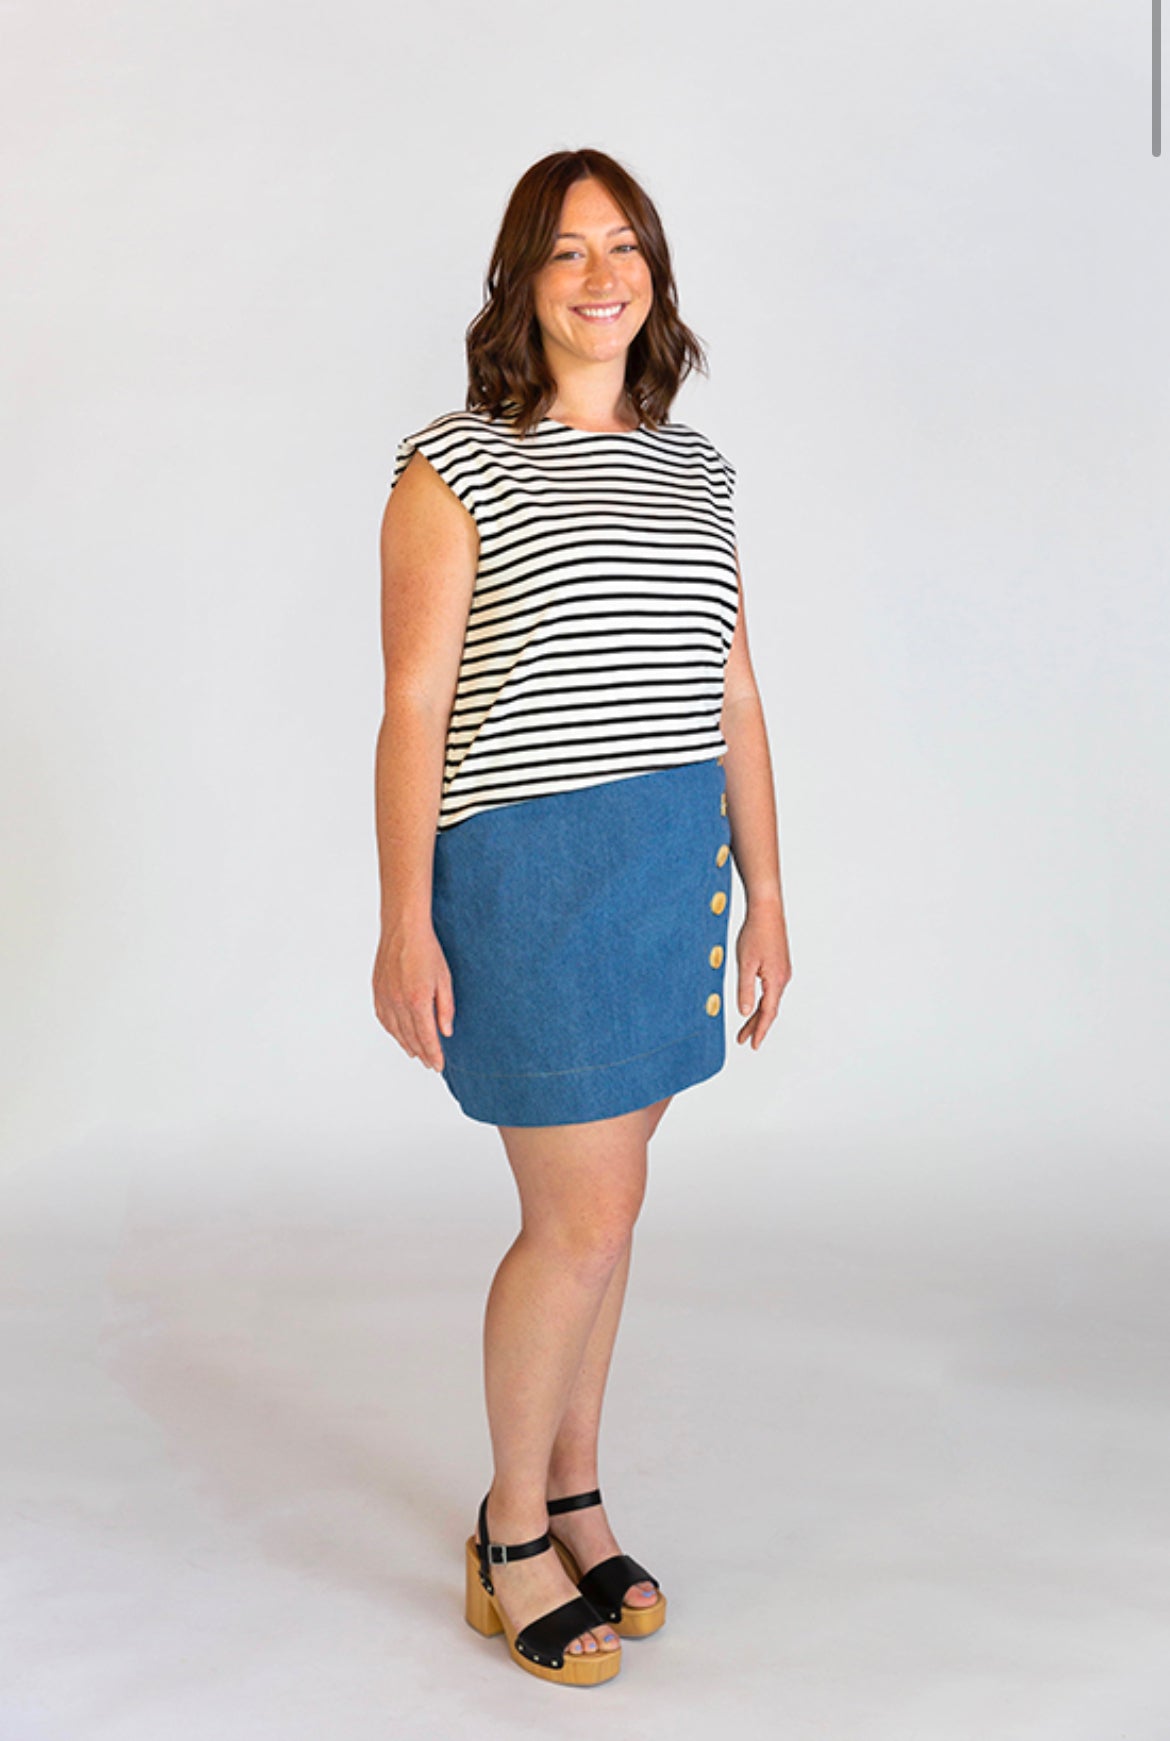 Chalk and Notch - Evelyn Skirt Sewing Pattern